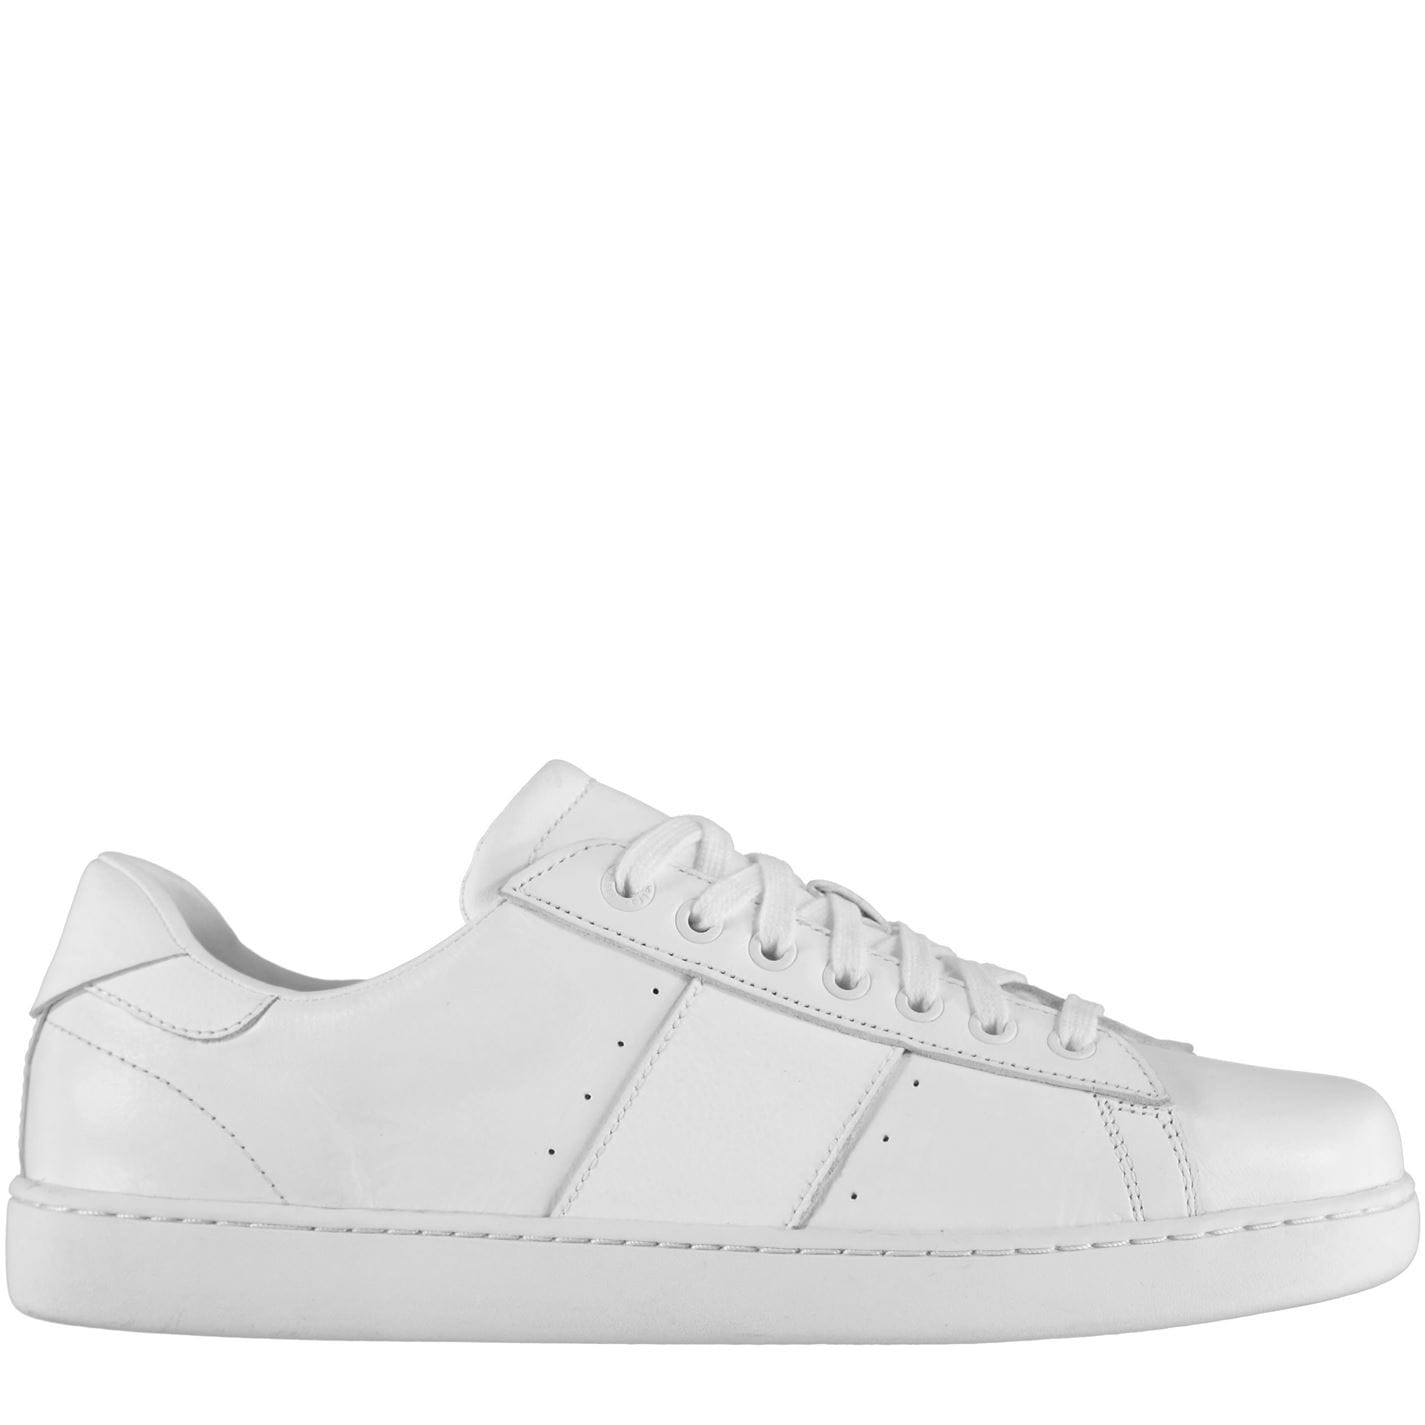 Zoom in theft Outlaw Firetrap Bouverie Ladies Trainers